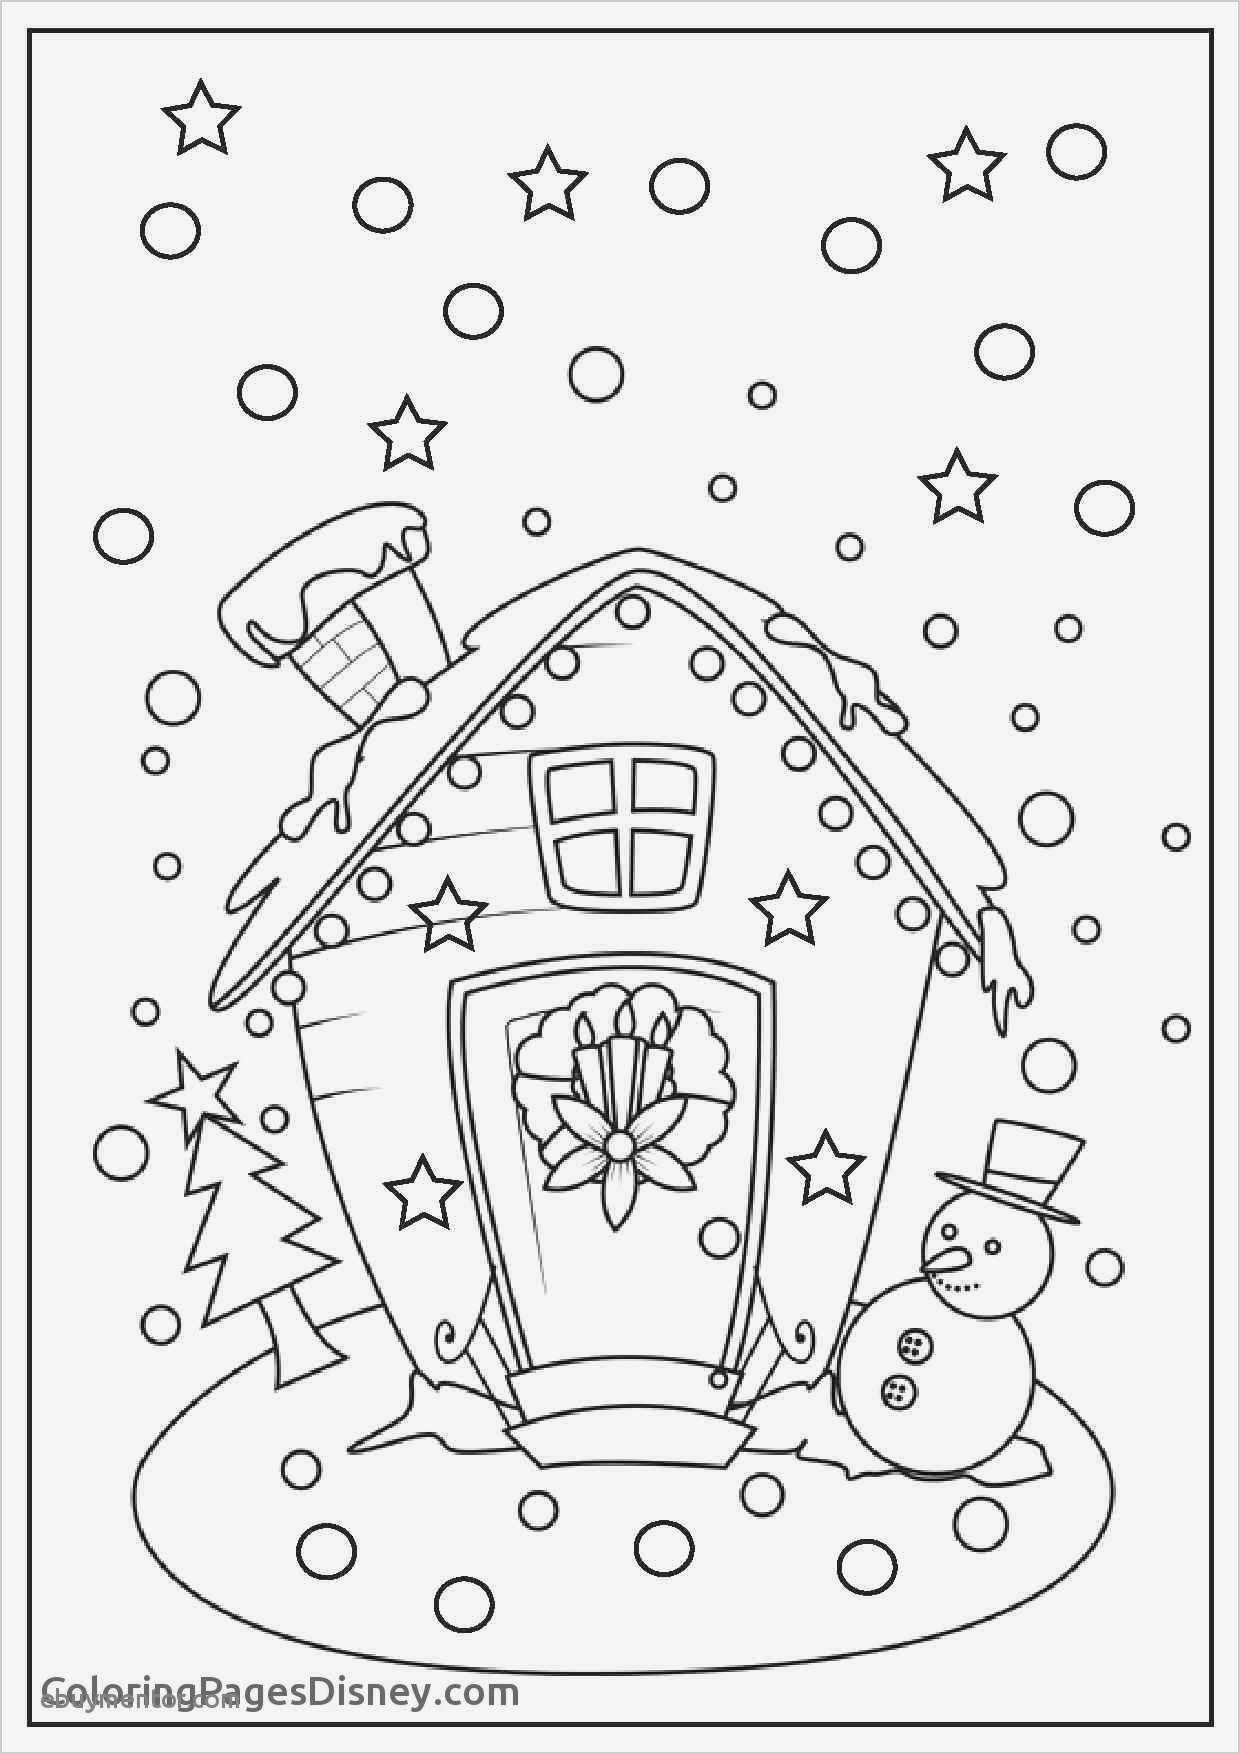 Merry Christmas Coloring Pages Free Xmas Coloring Pages Printable - Xmas Coloring Pages Free Printable